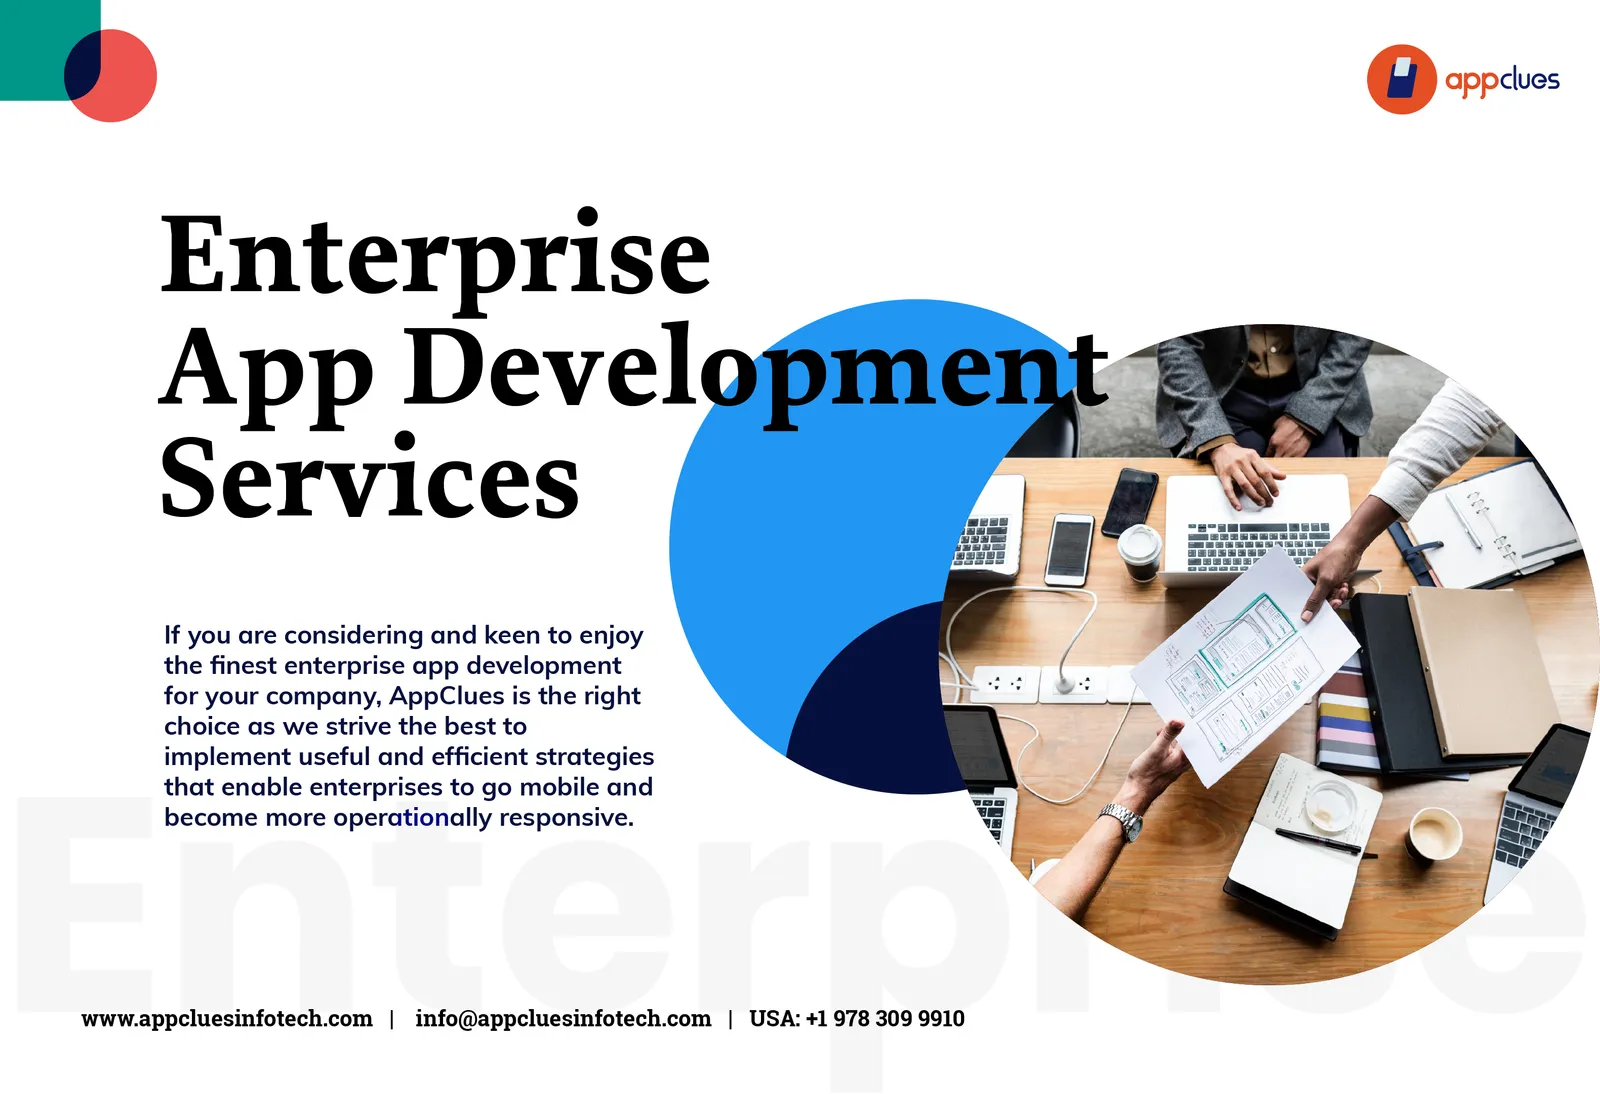 Top Enterprise Mobile App Developers in the United States